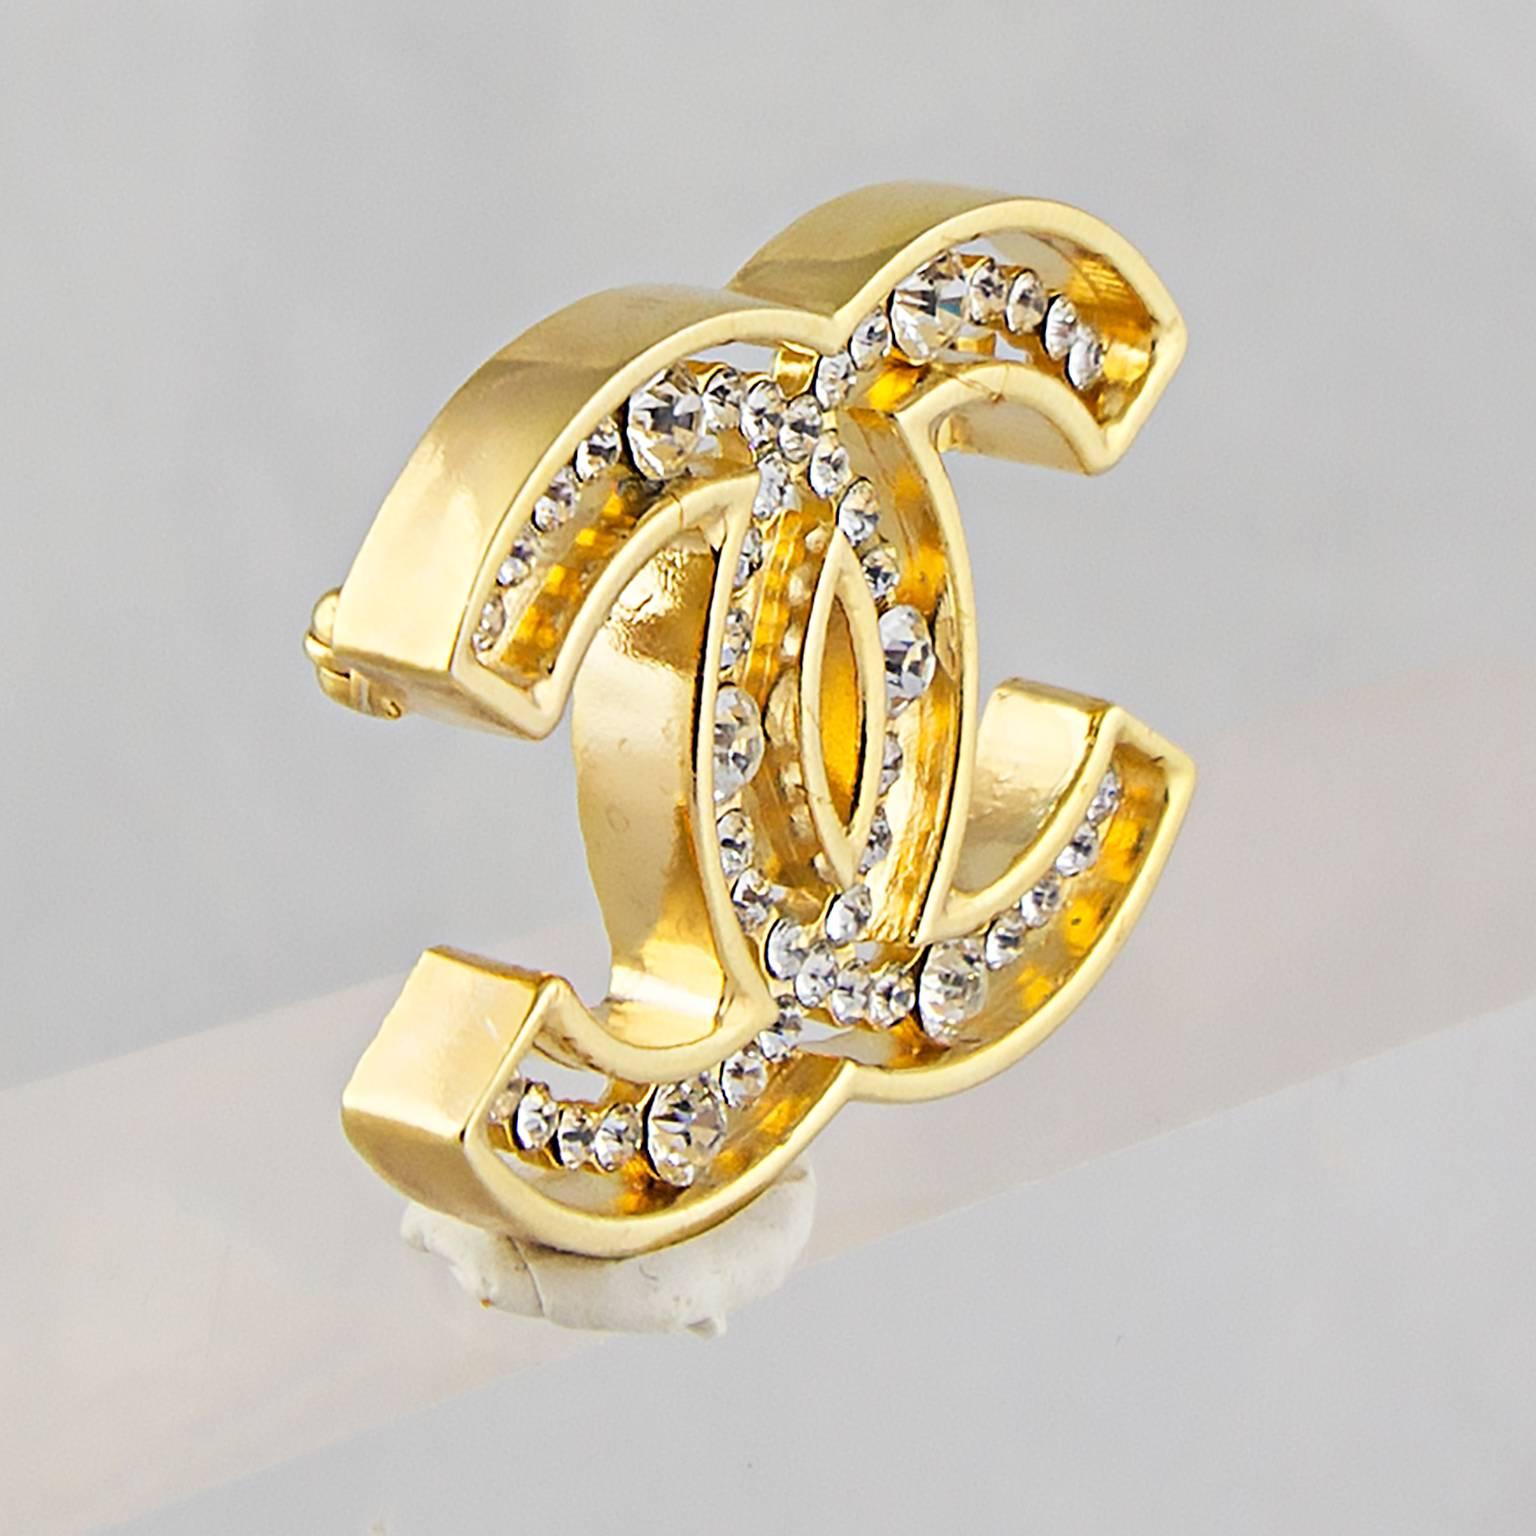 Chanel CC Logo Brooch with Crystal Rhinestones.
Set into high carat gold plated metal.
Made in France for the Autumn 2002 Collection